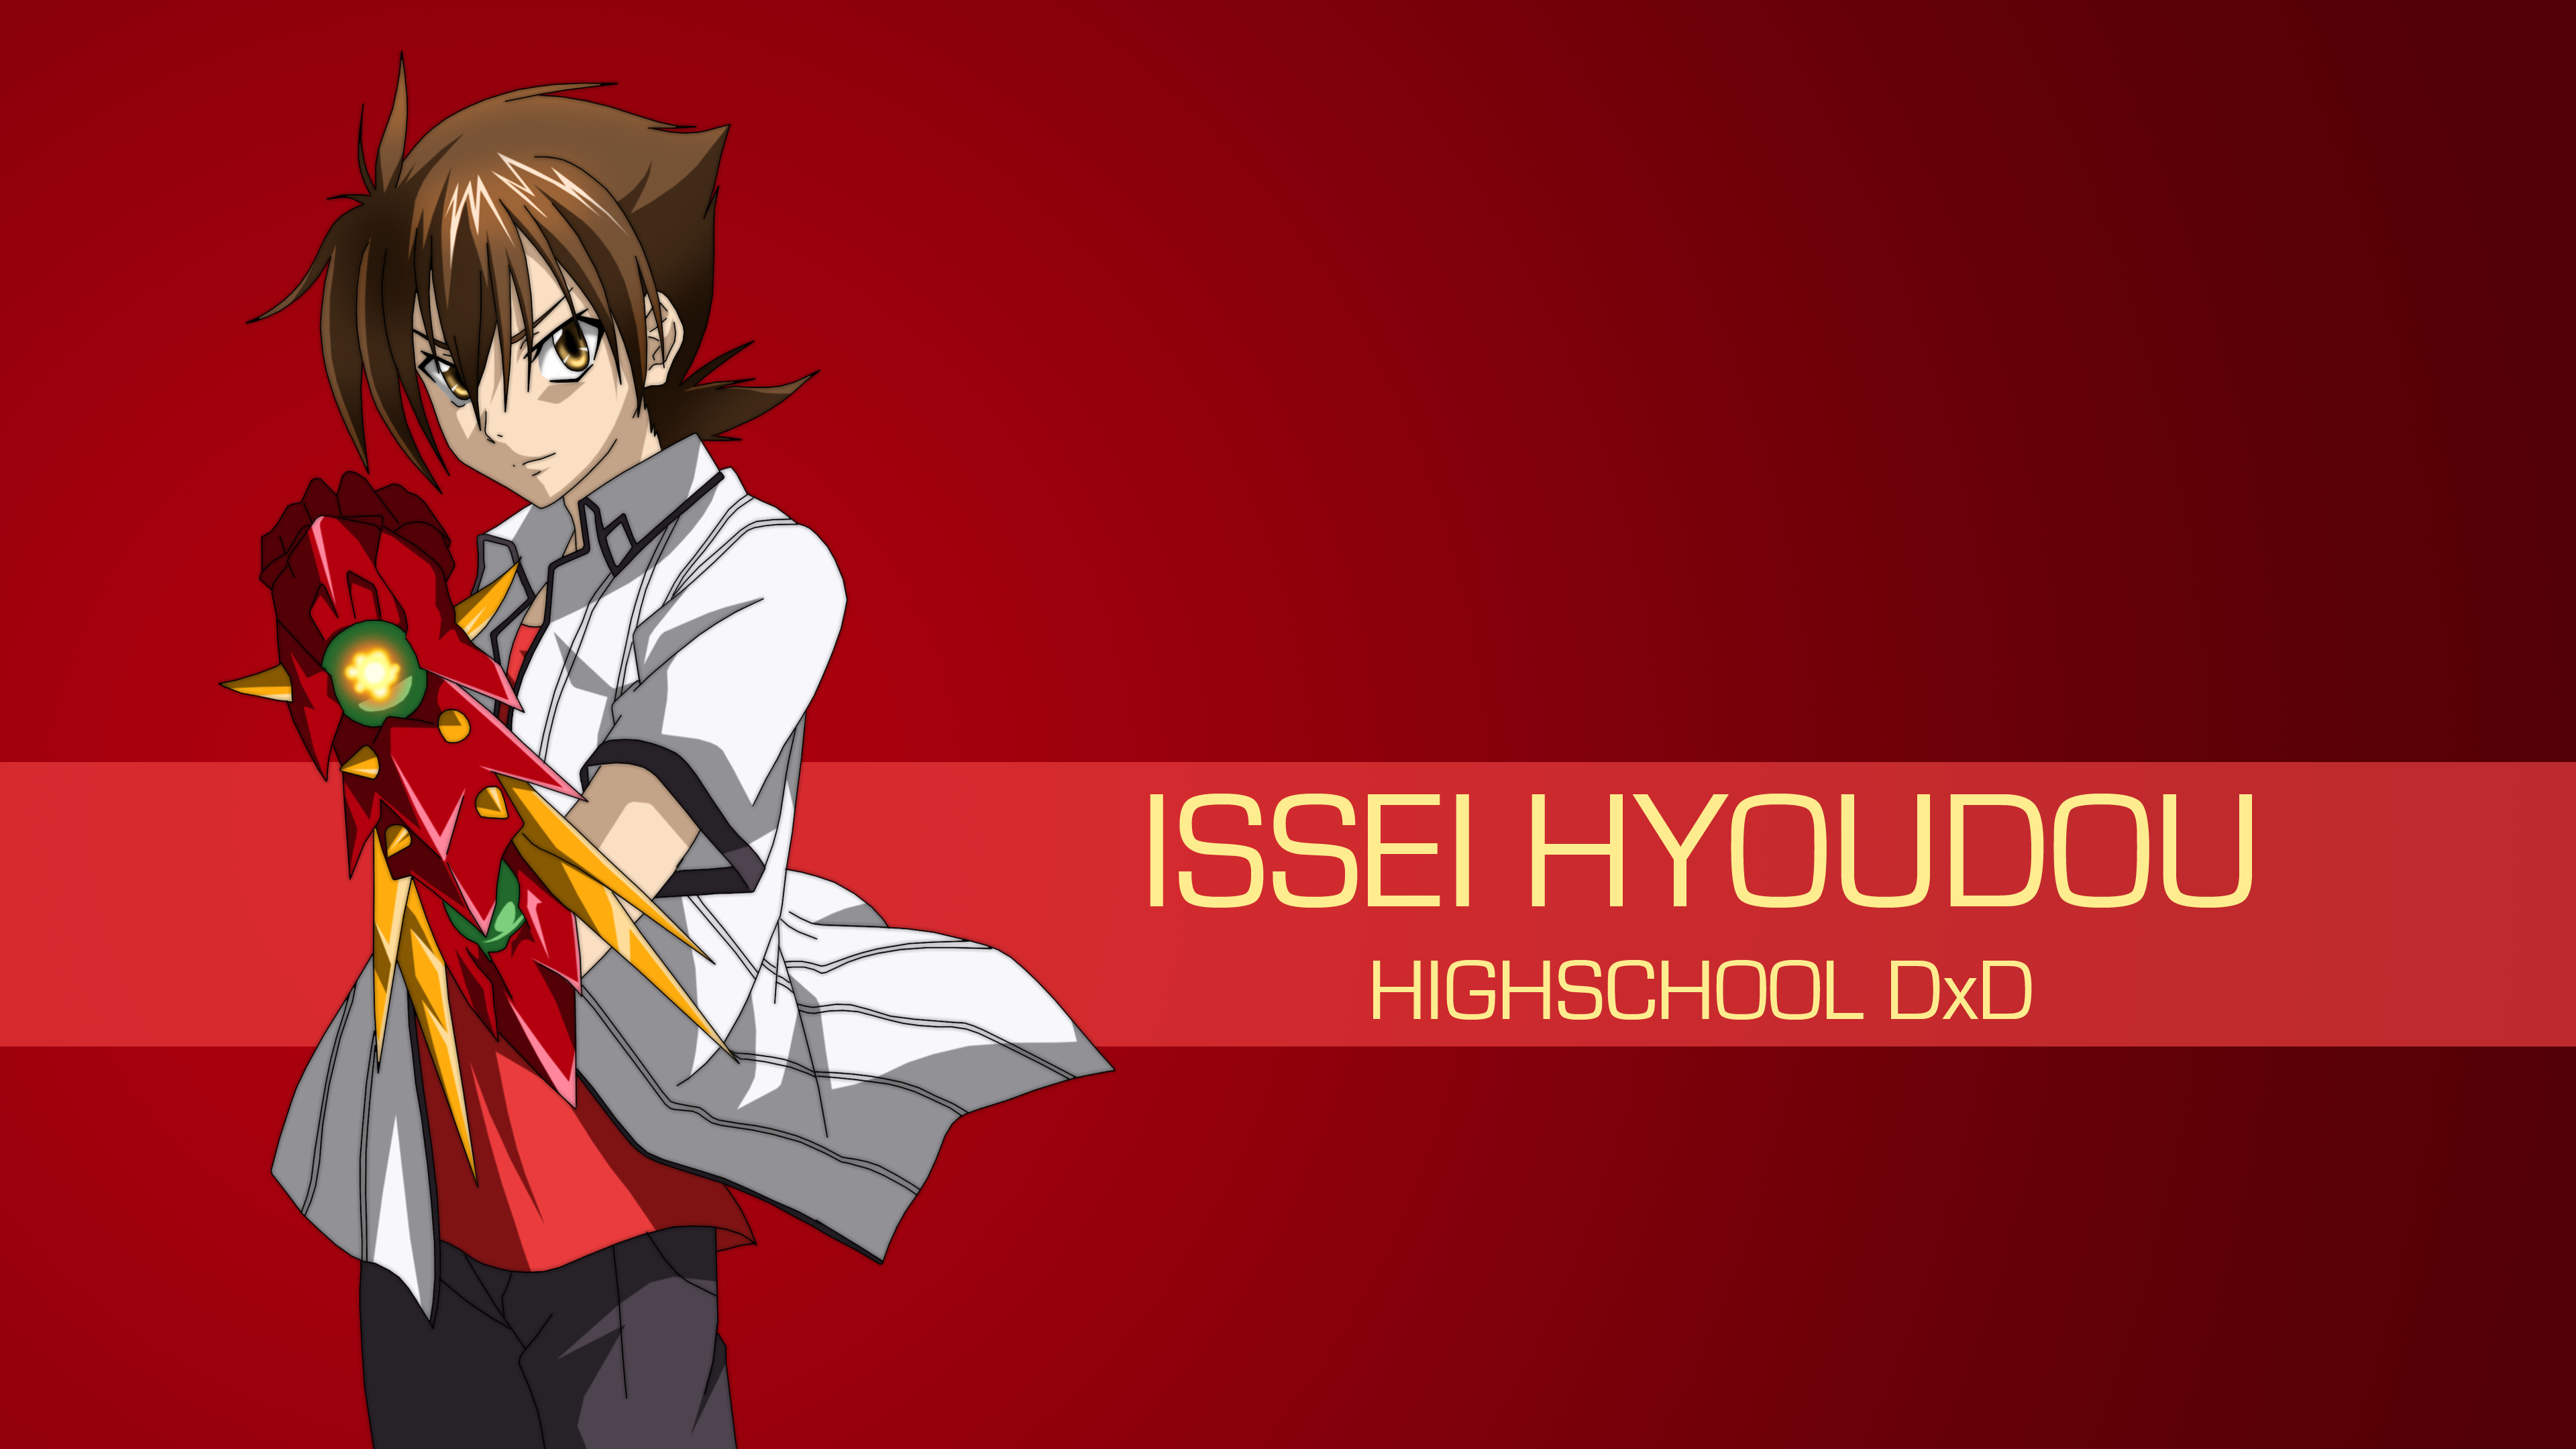 3840x2160 55 High School DxD HD Wallpapers | Backgrounds